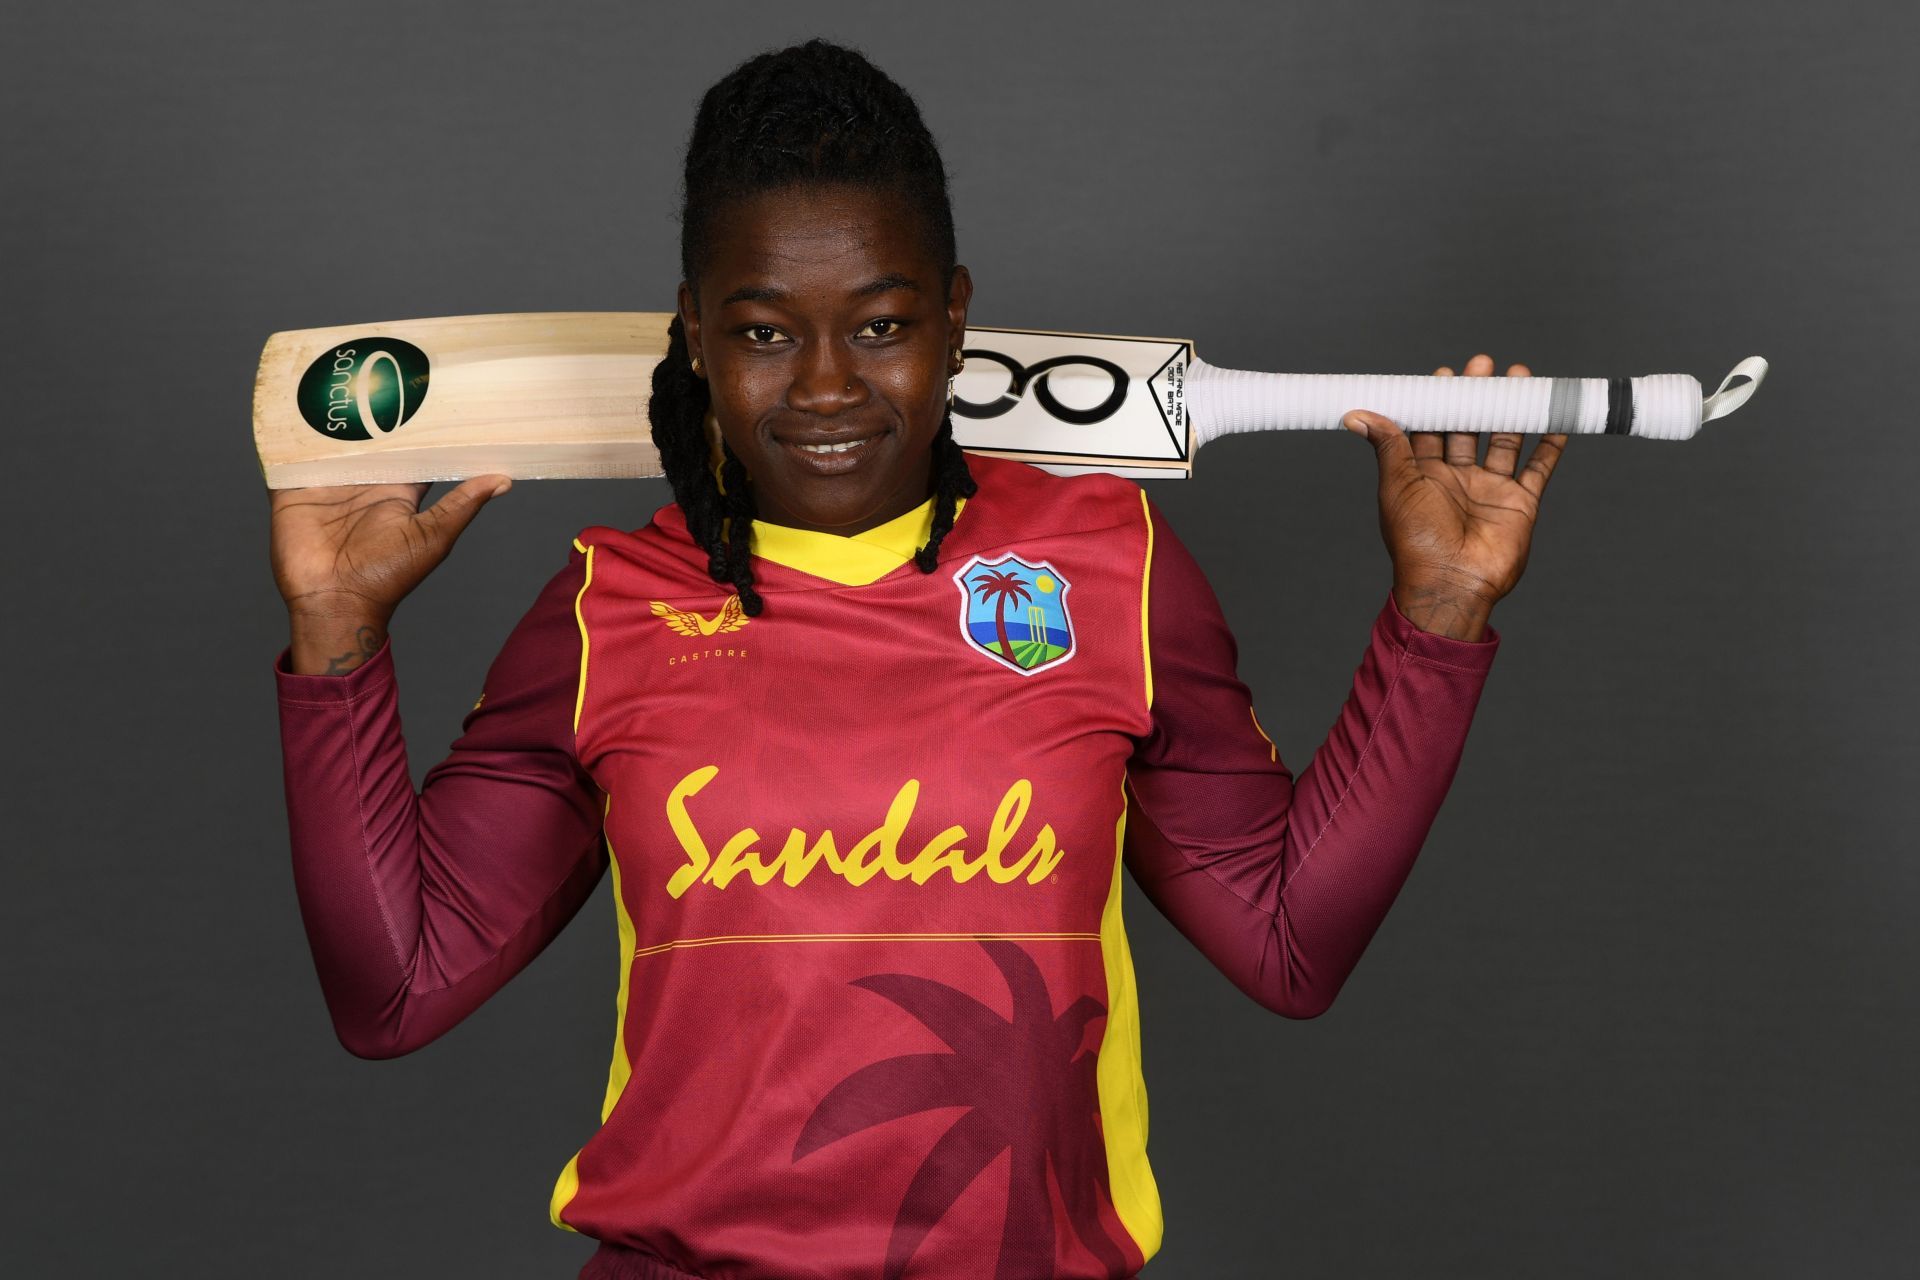 Deandra Dottin will play a major role for West Indies Women on Sunday